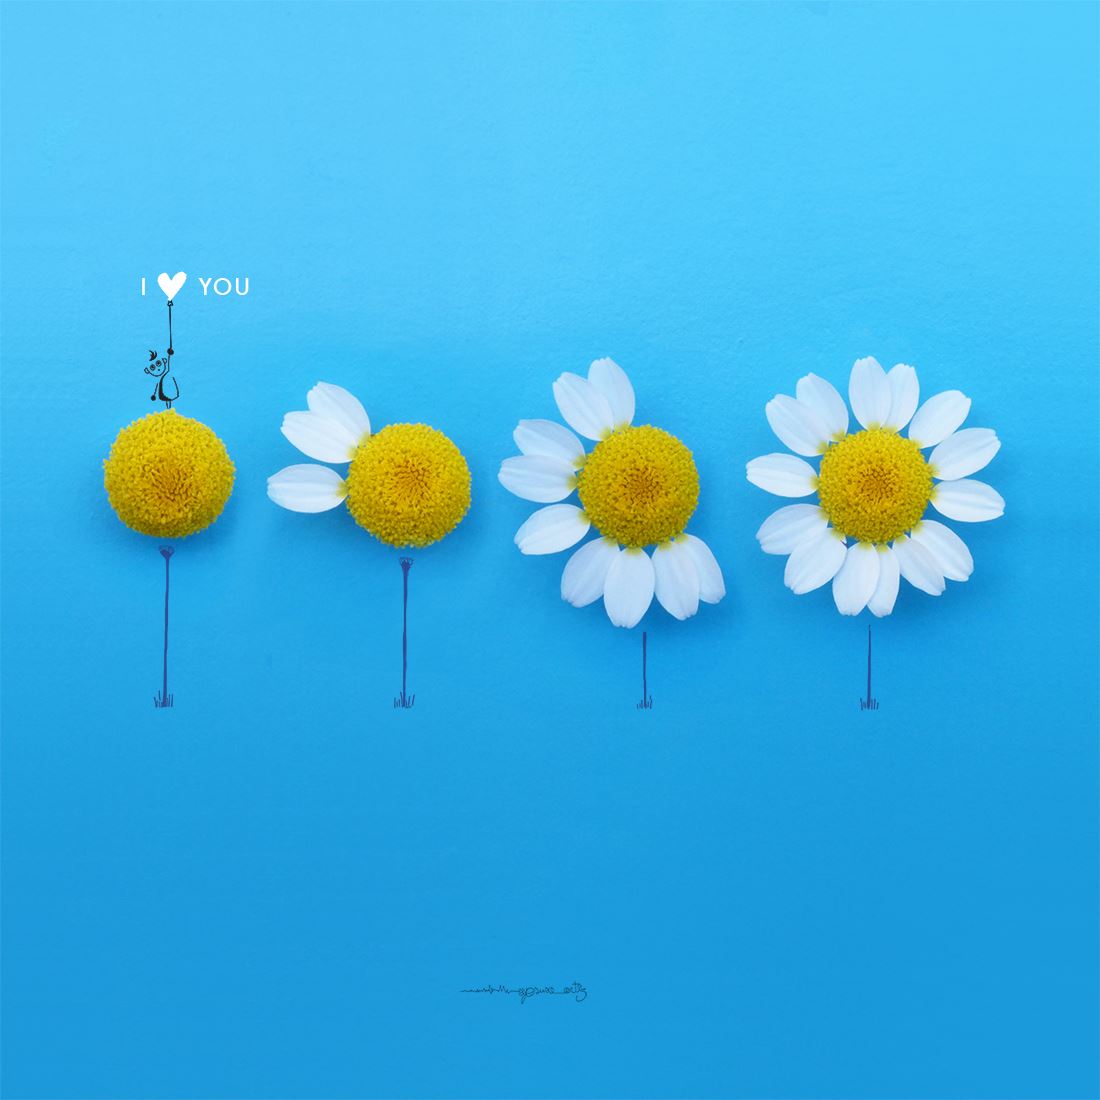 Jesuso Ortiz Turns Flowers and Everyday Objects Into Art Flower Illustration Daisies